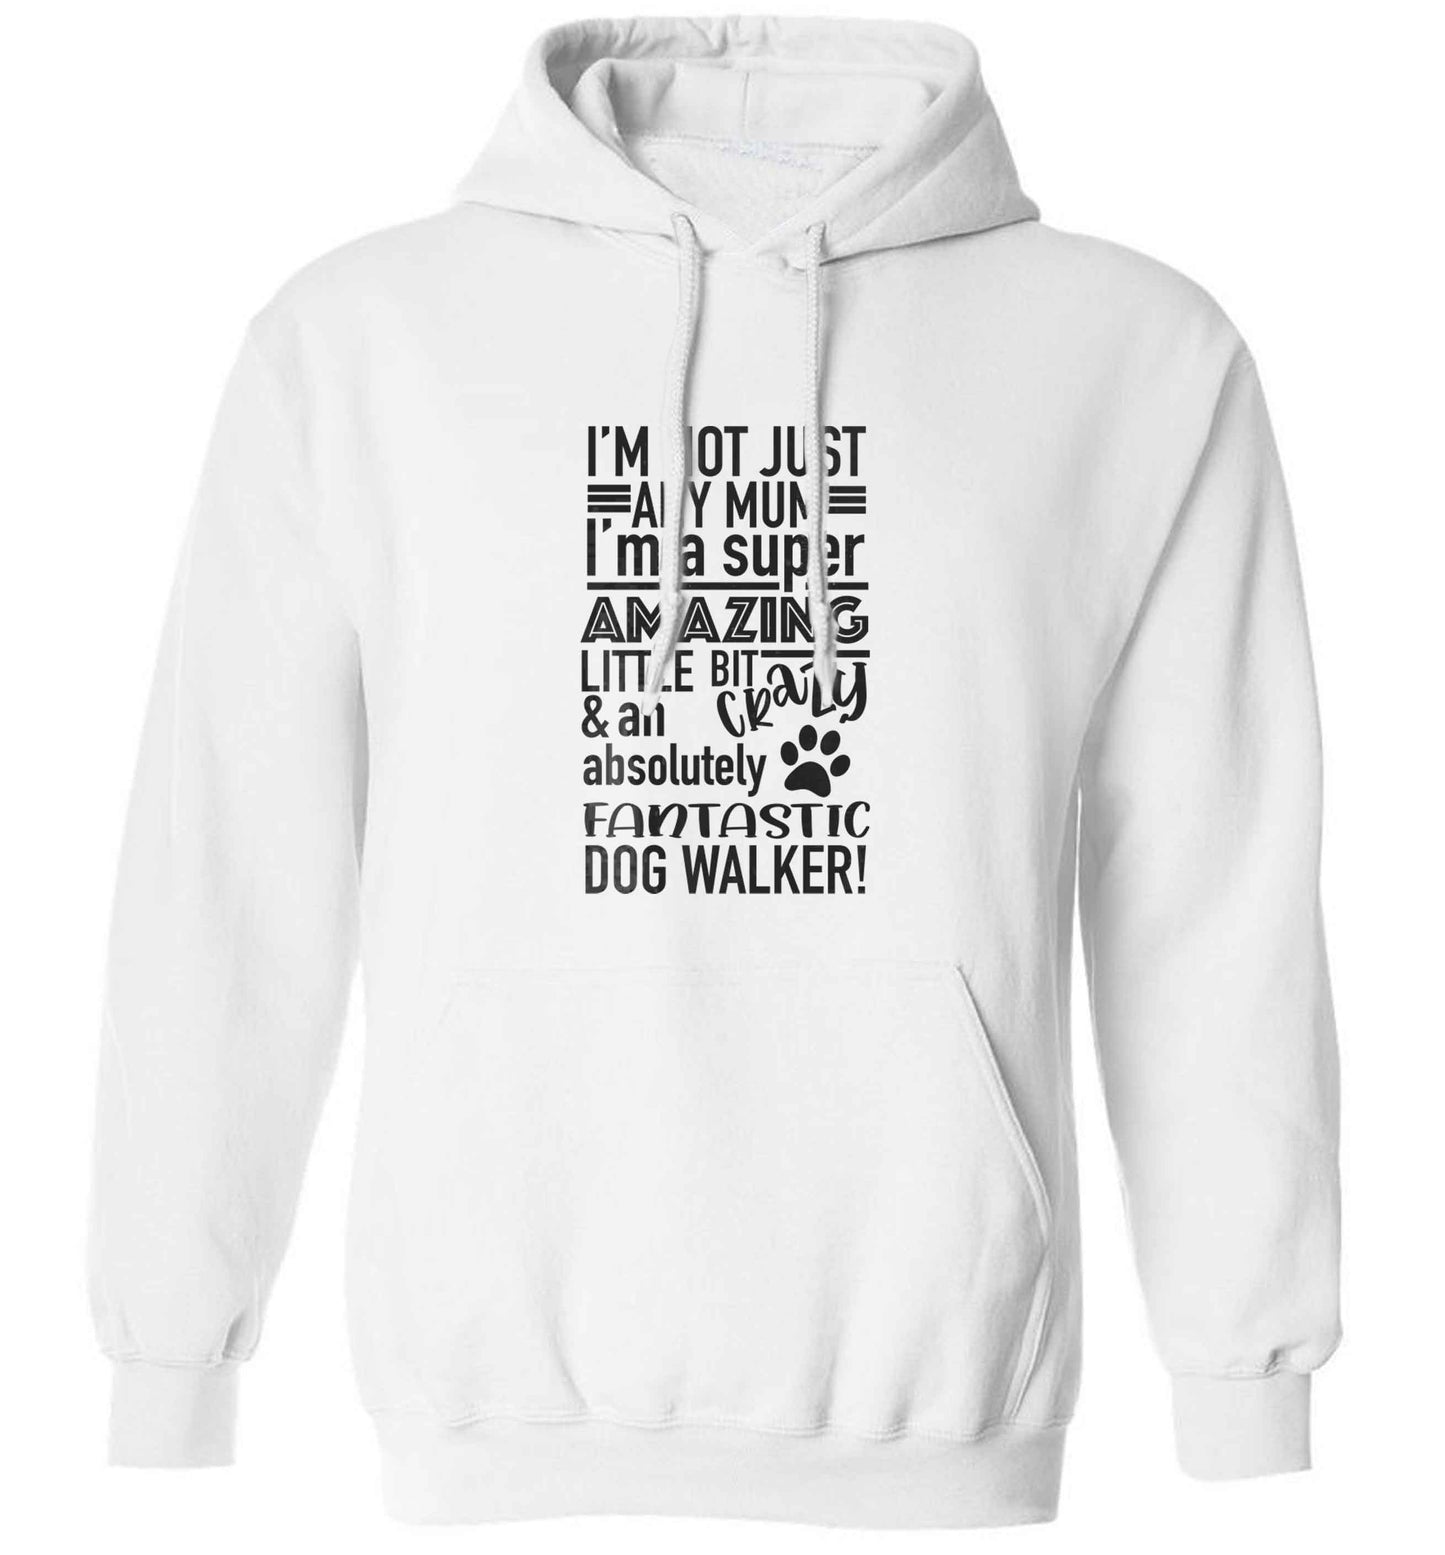 I'm not just any mum I'm a super amazing little bit crazy and an absolutely fantastic dog walker! adults unisex white hoodie 2XL